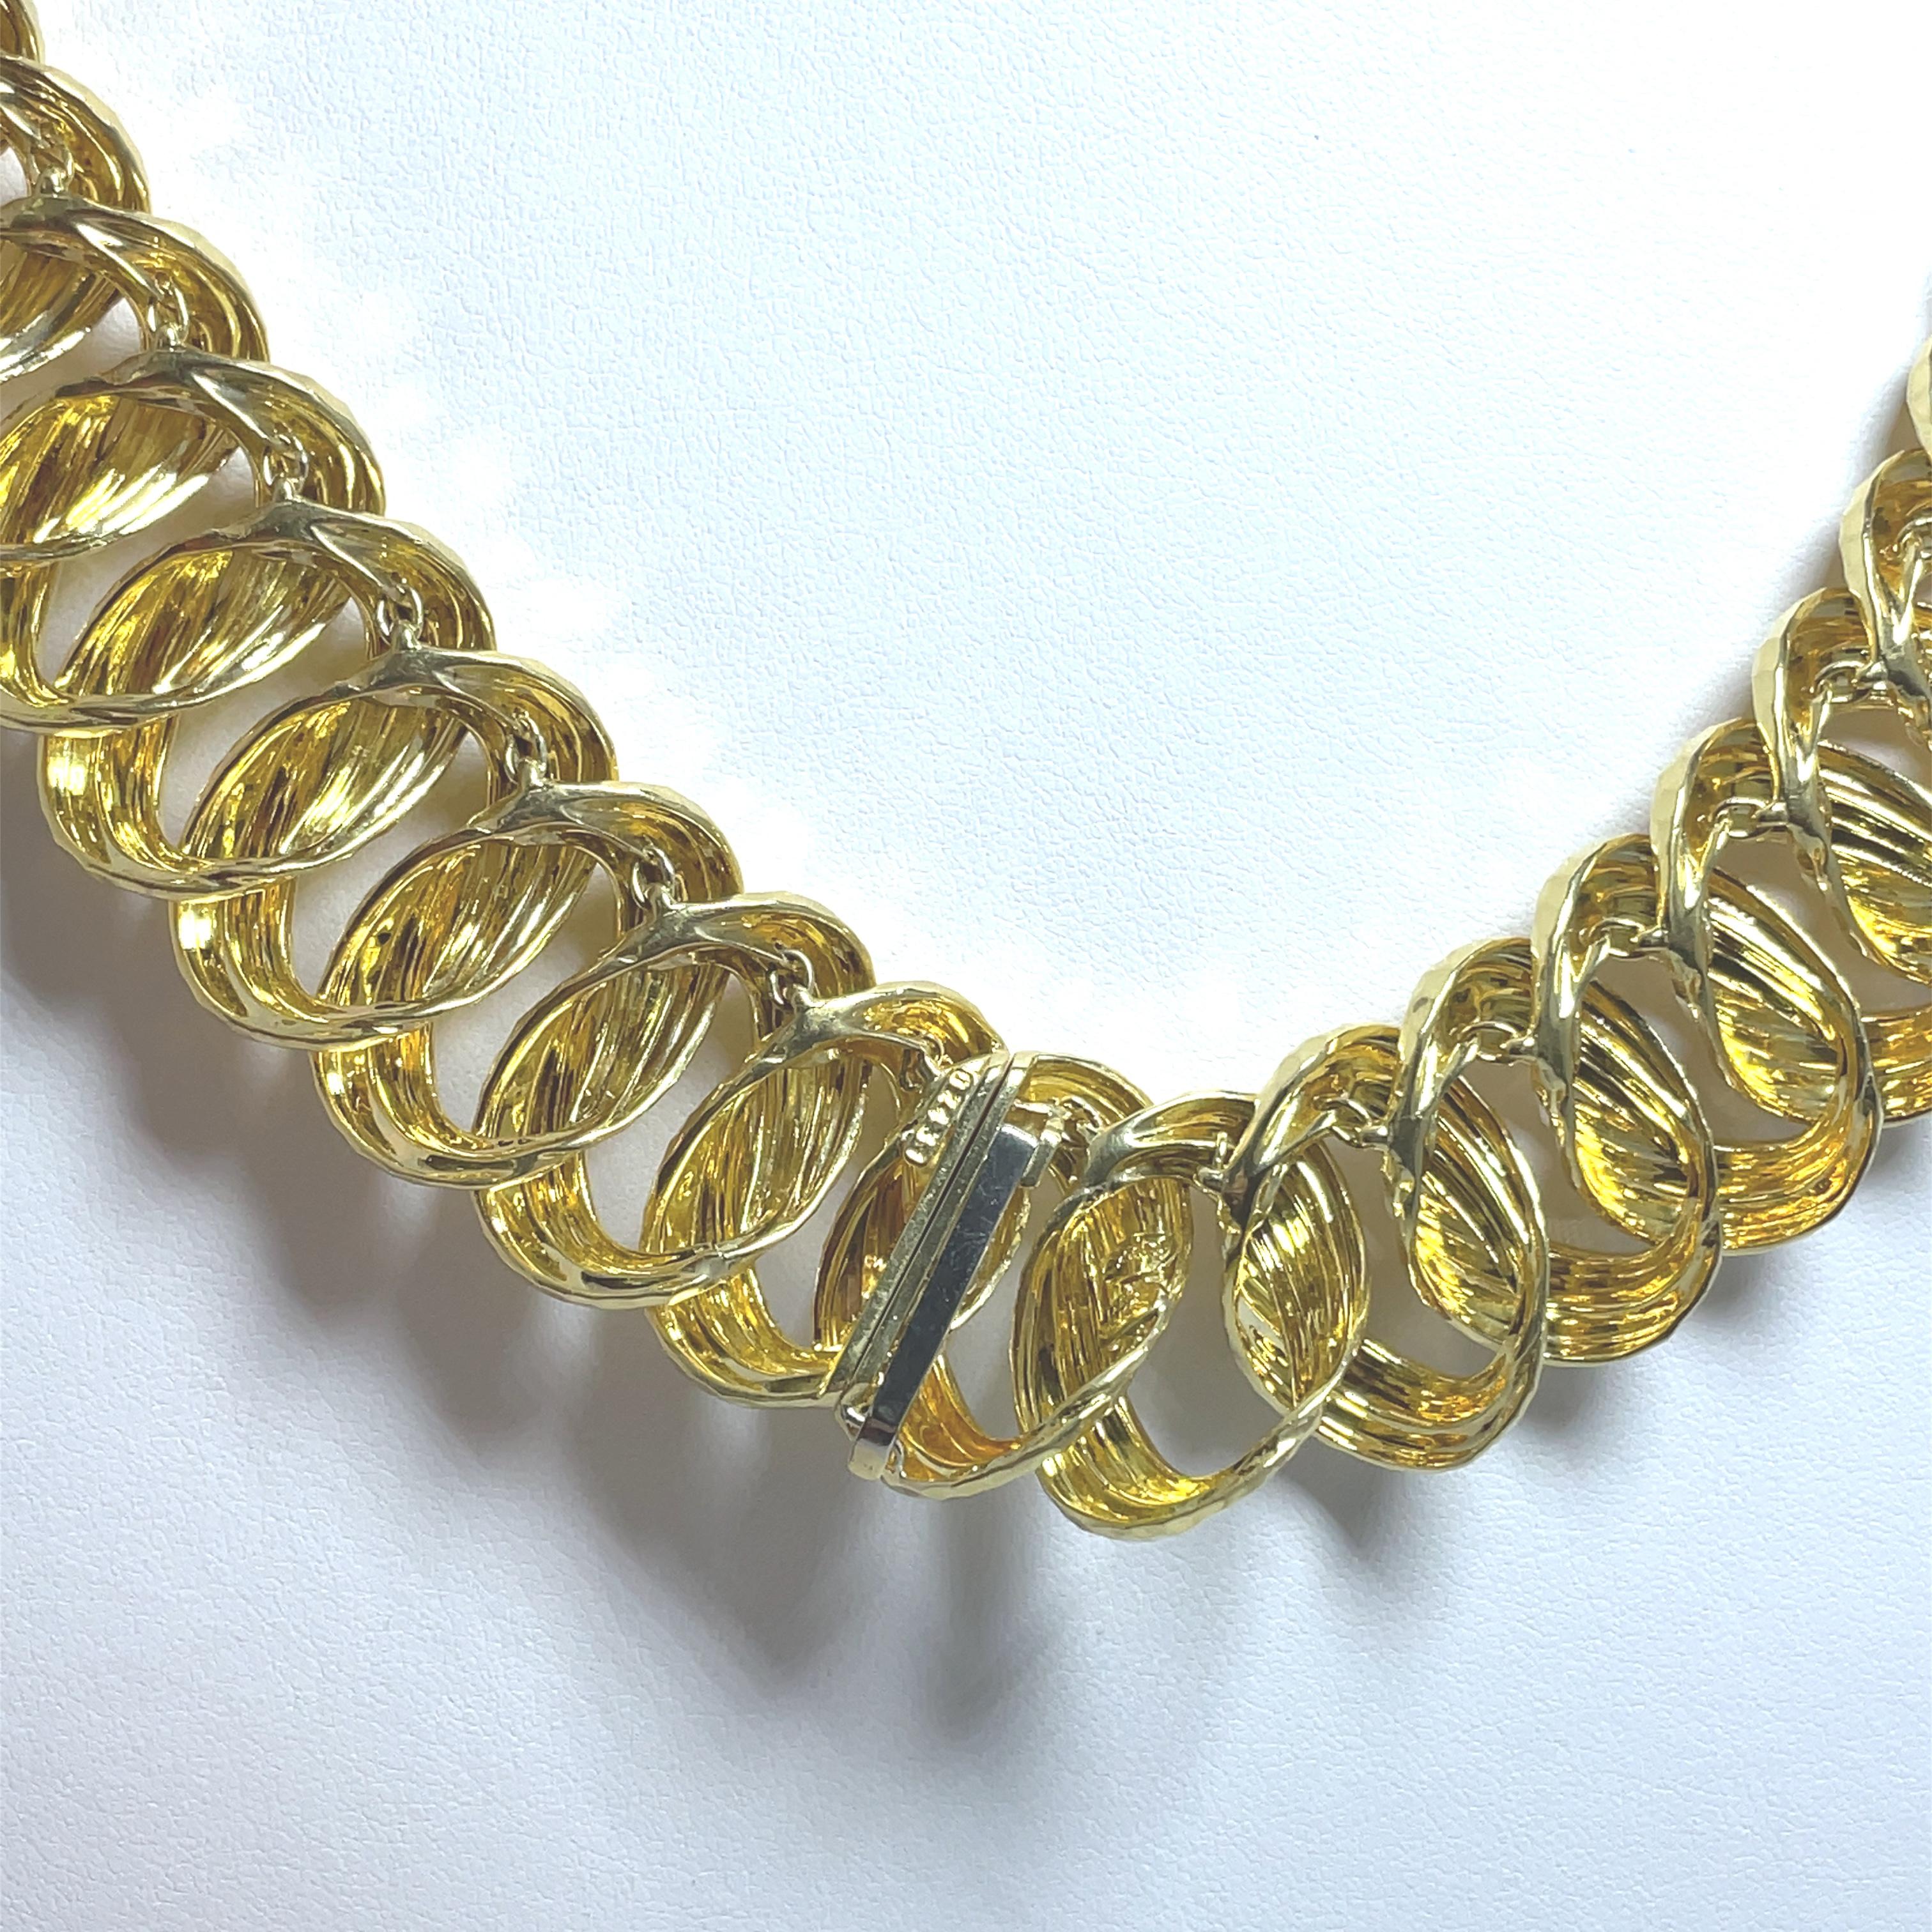 18K Yellow Gold Hammered Curb Link Necklace from Henry Dunay.  Bright Finish Look on this gorgeous heavy necklace.  From our Estate Collection gorgeous Henry Dunay 18K Yellow Gold Hammered Curb Link Necklace.  Brightly Polished Hammered Finish. 